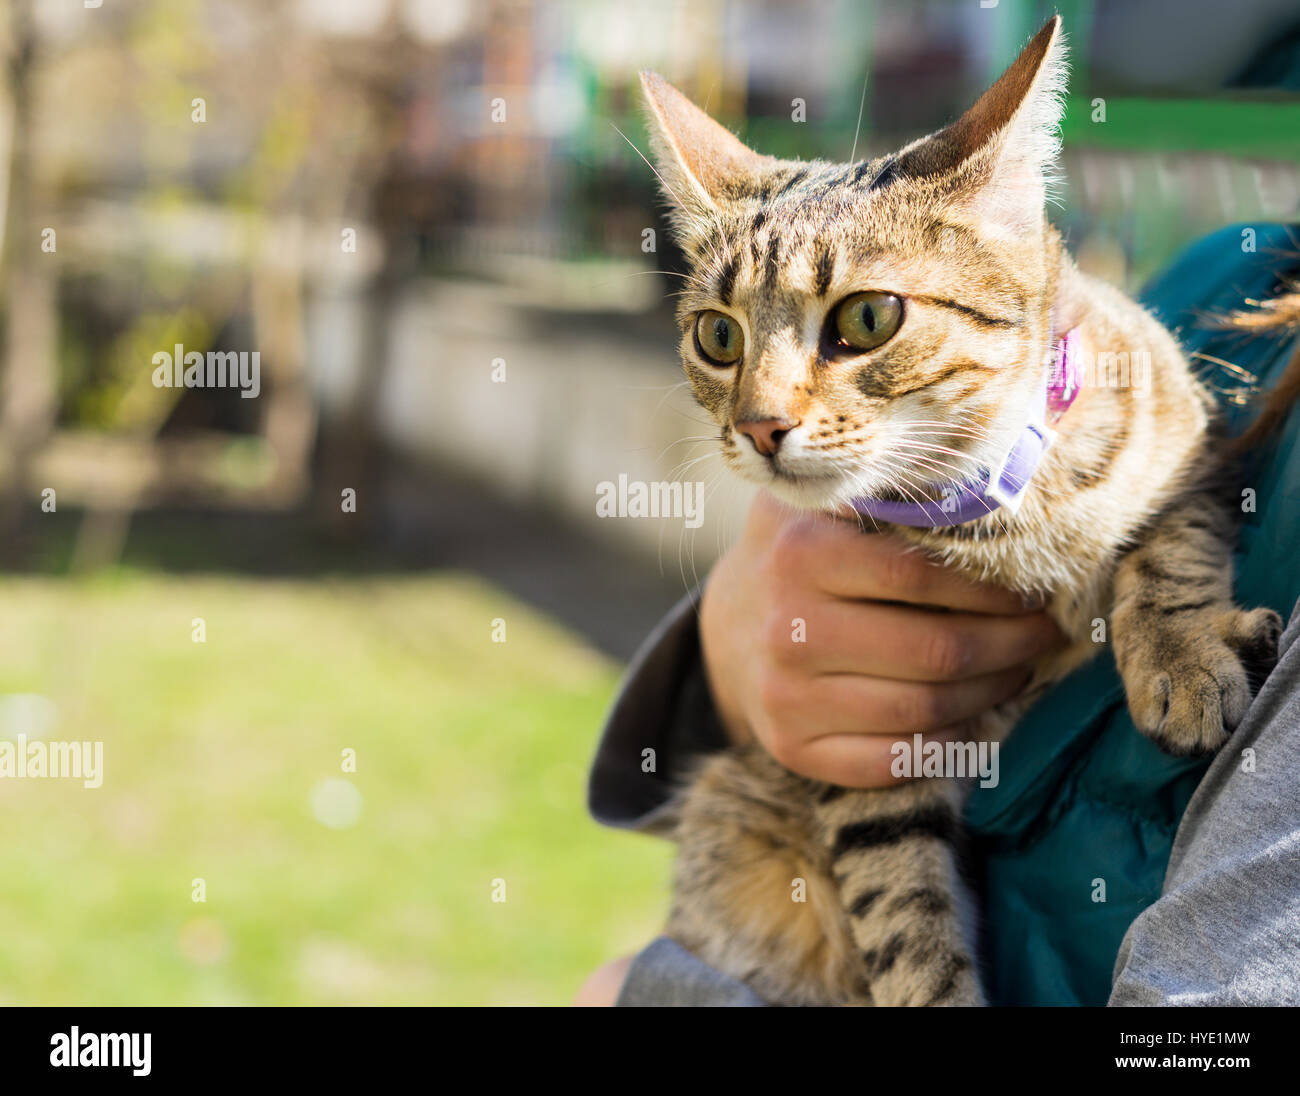 First going out. Kitten on a leash outdoor. Woman is holding cat on hands. Stock Photo